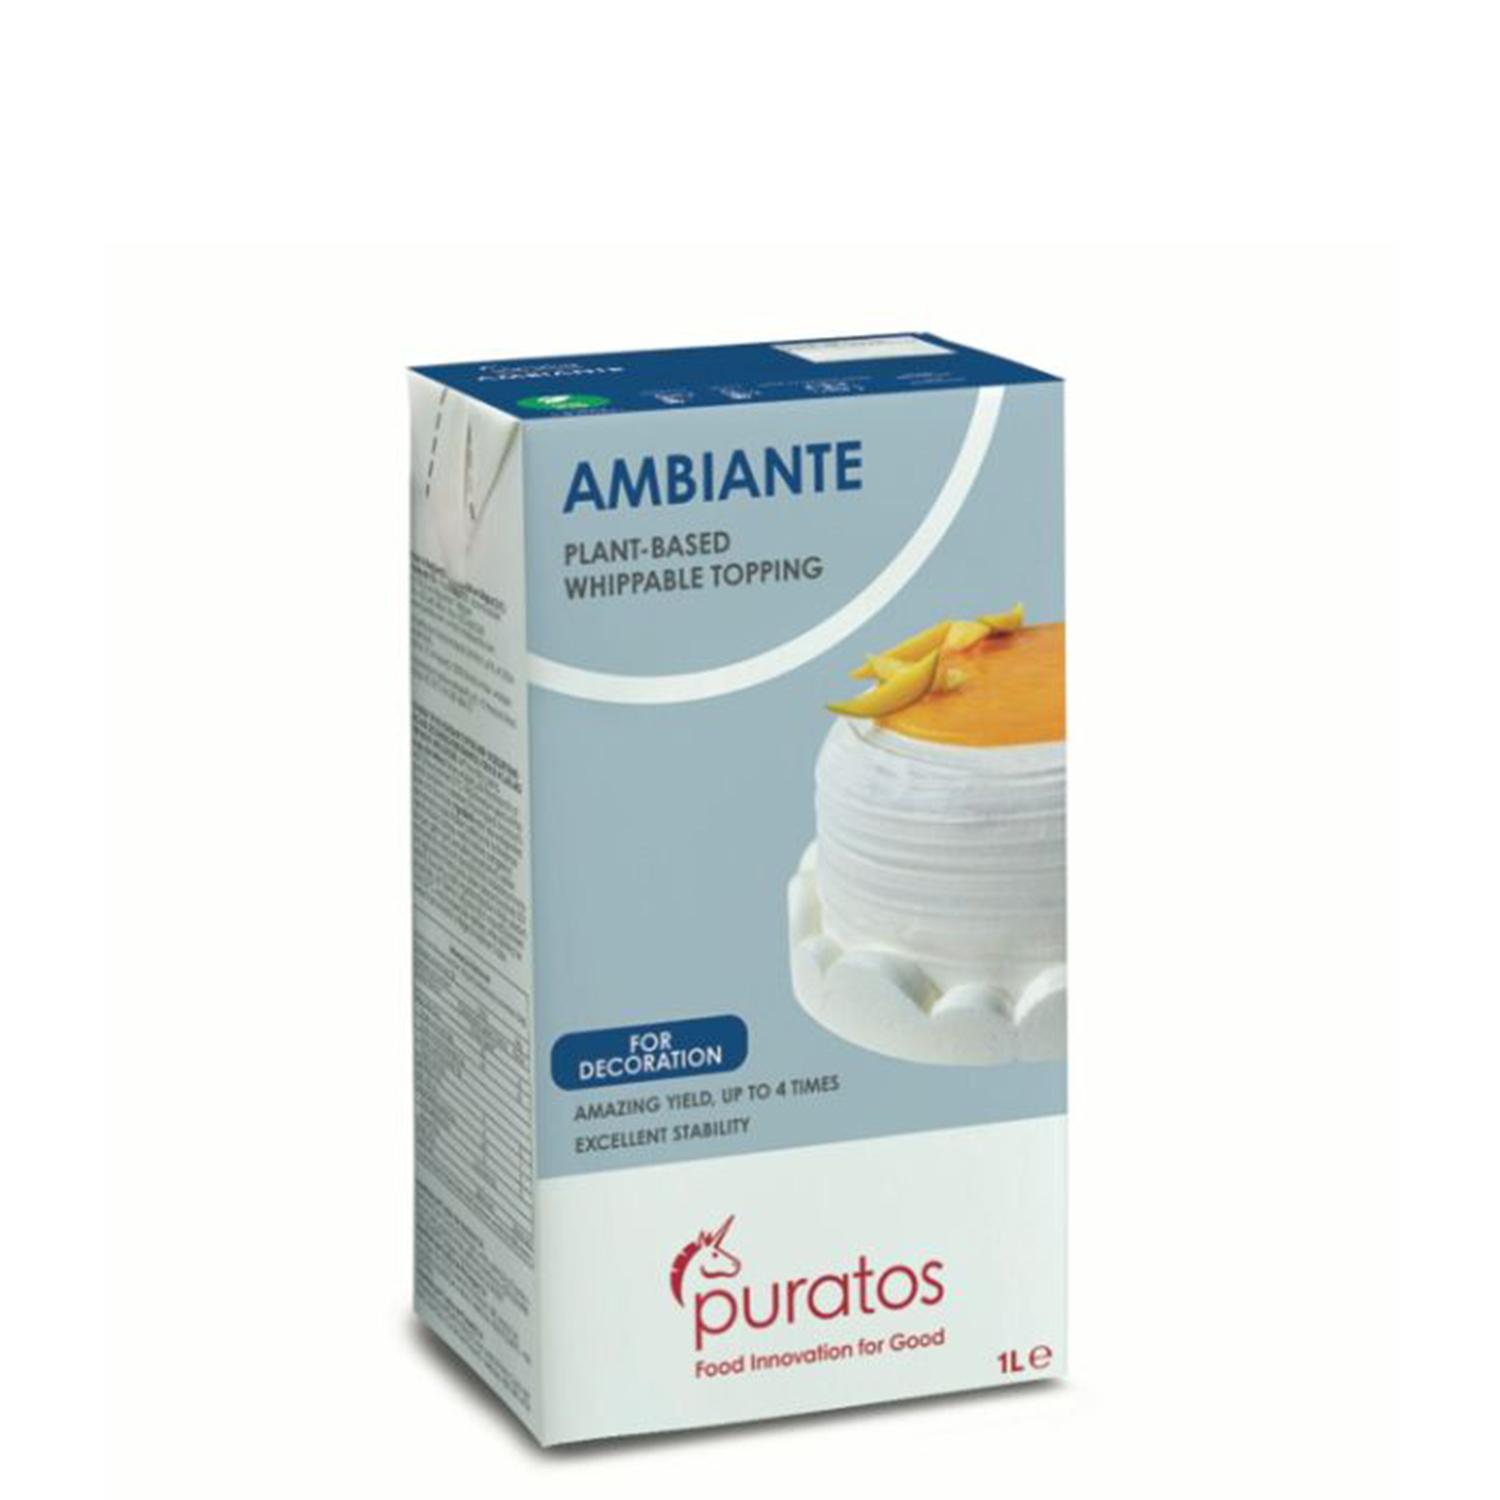 PACK OF 12 - WHIPPING CREAM PURATOS AMBIANTE 1LITRE